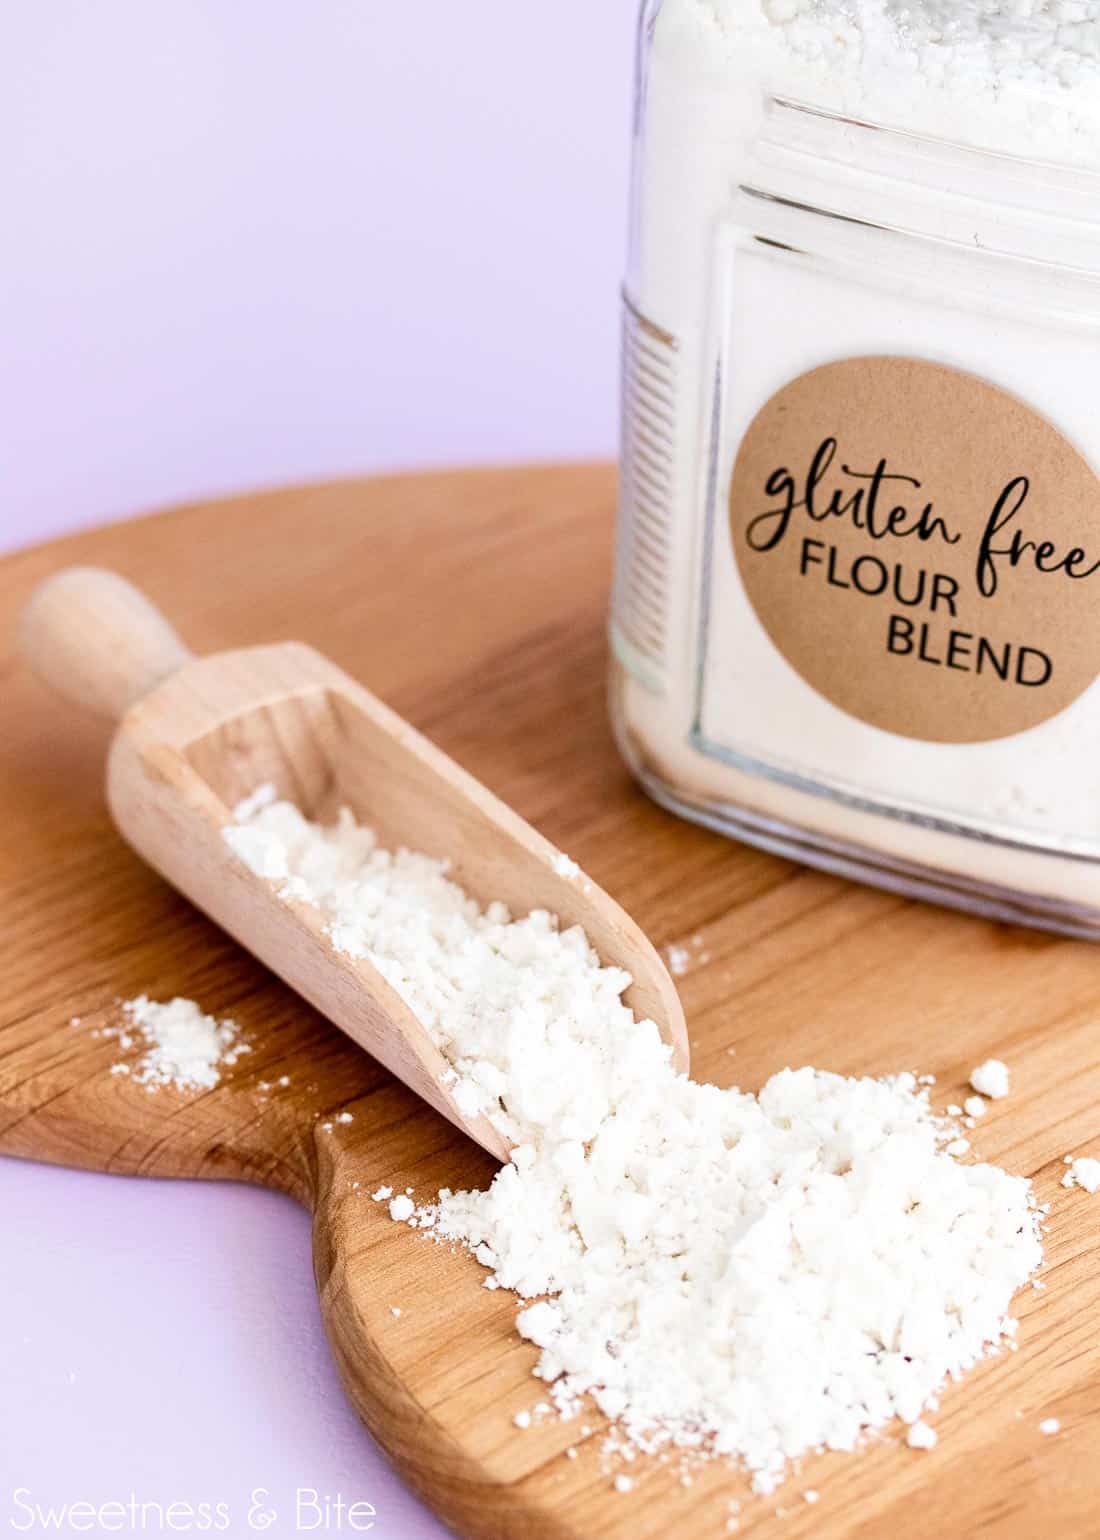 Jar of gluten free flour and a scoop of flour on a wooden board.